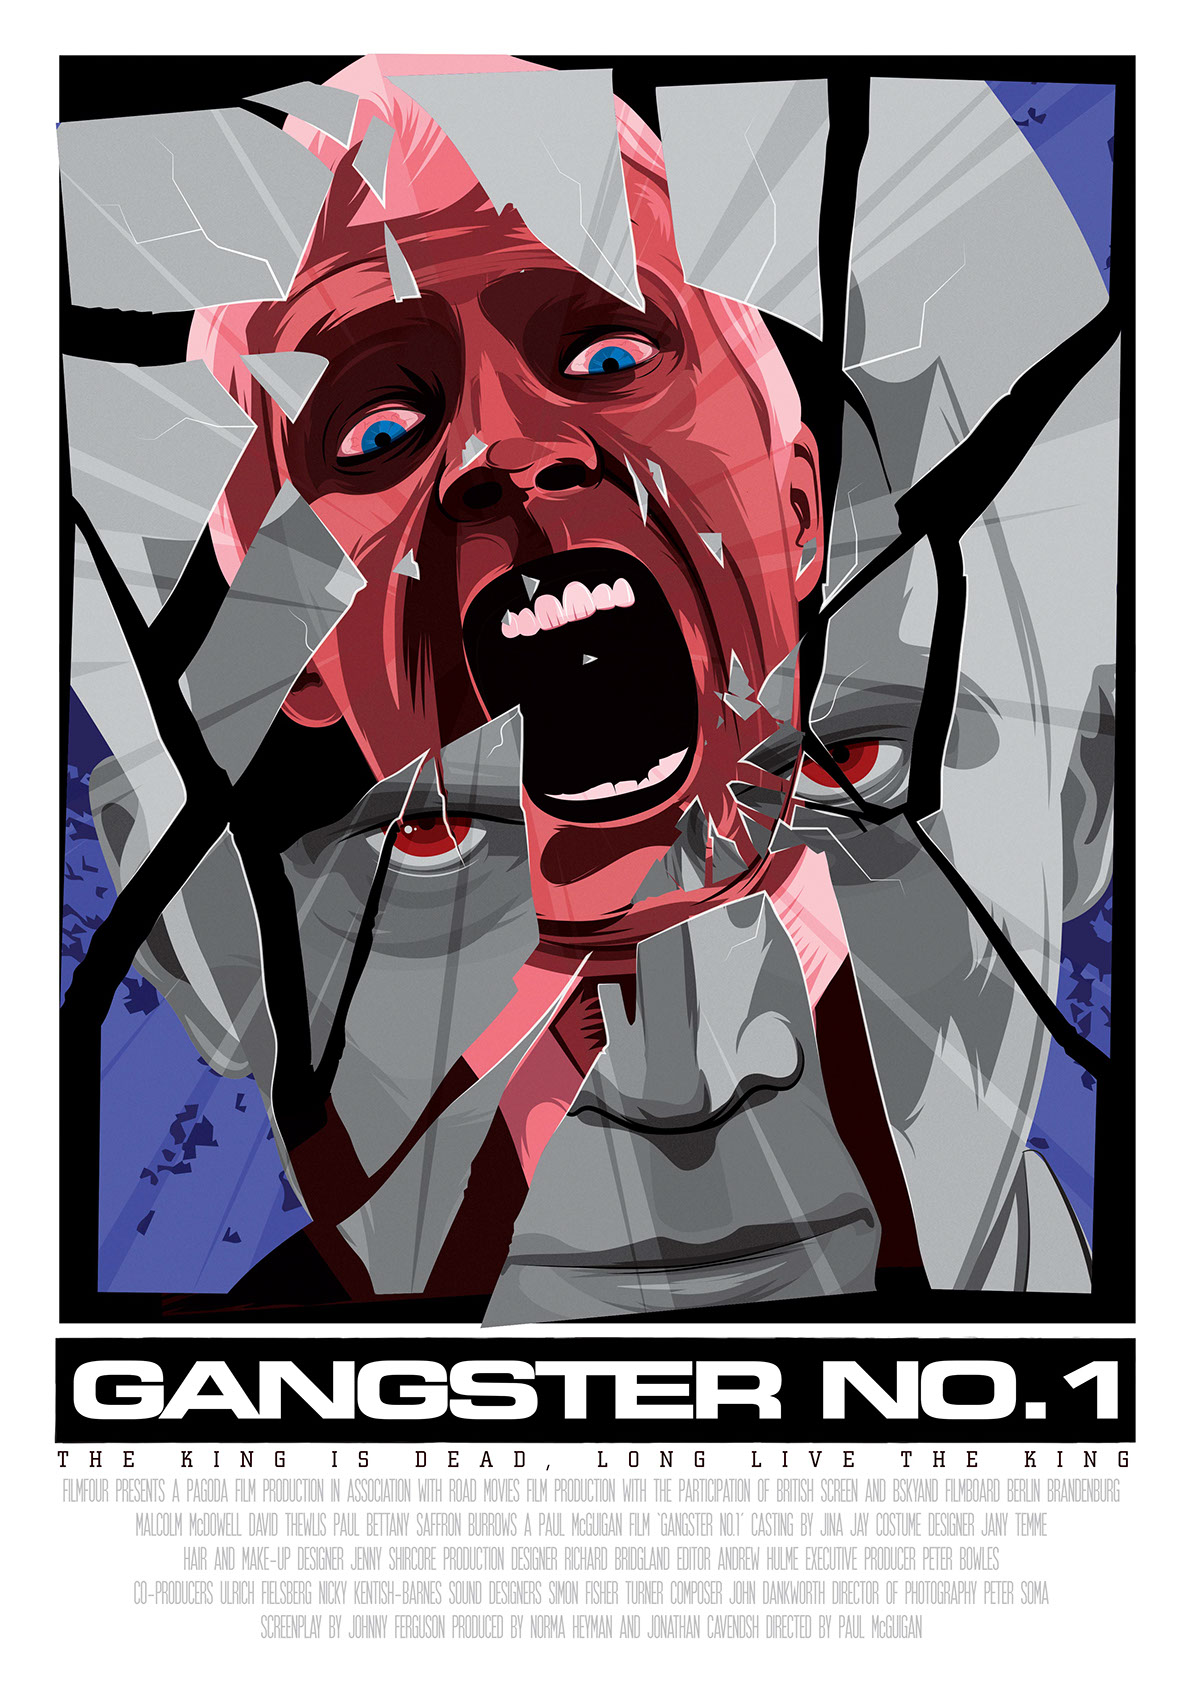 gangster gangster no.1 paul bettany Malcolm McDowell movie poster Movies Illustrator tomall tomalldesigns favourite axe poor little eddie im filling up pull over roland.... puncture photoshop